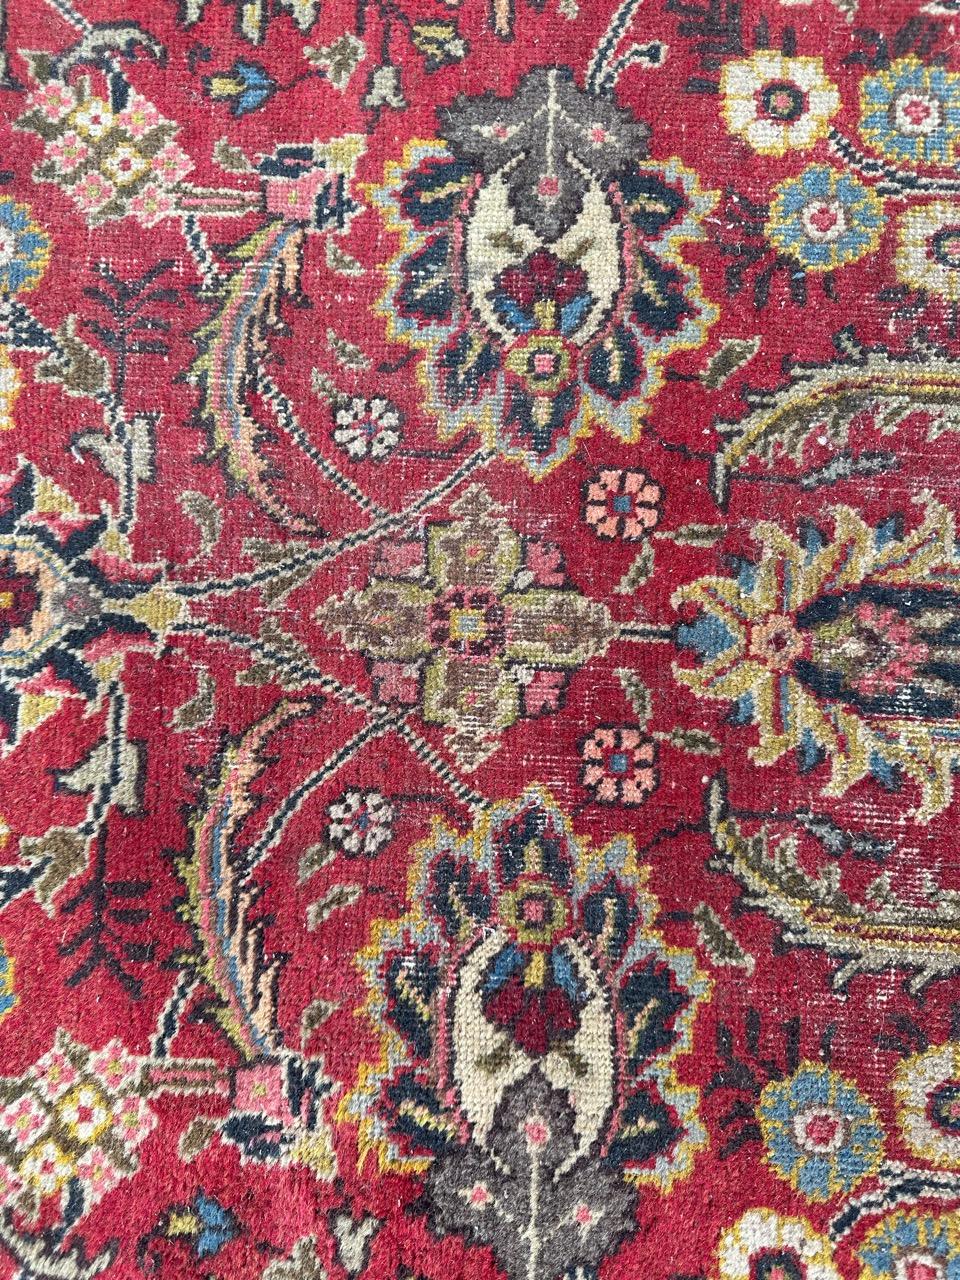 Pretty antique tabriz rug entirely hand knotted with wool velvet on cotton foundation.
A vintage rug dating back to the first half of the 20th century, rich in history and character. Enveloped in a vibrant red backdrop, this rug showcases elegant